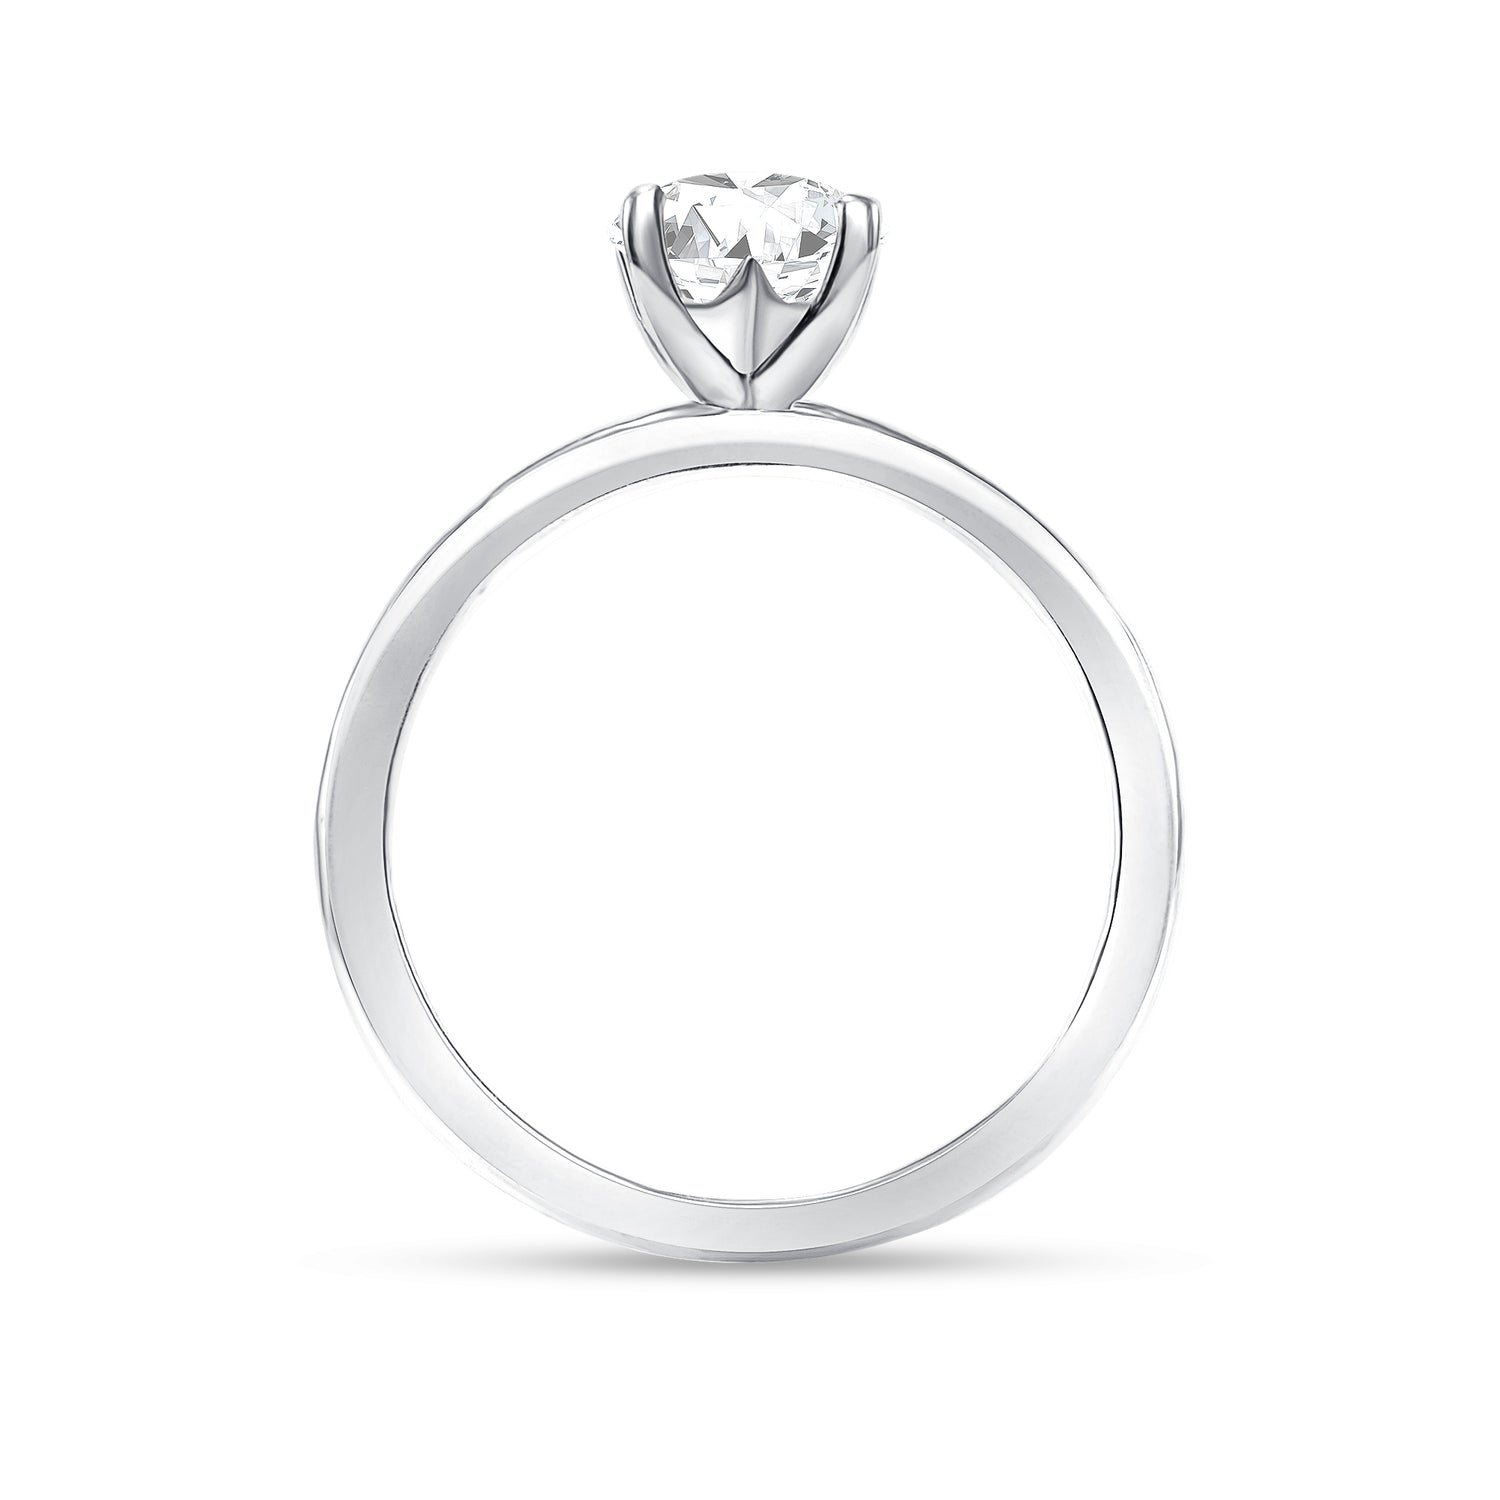 "UNION"CLASSY ENGAGEMENT STAR SOLITAIRE DIAMOND RING